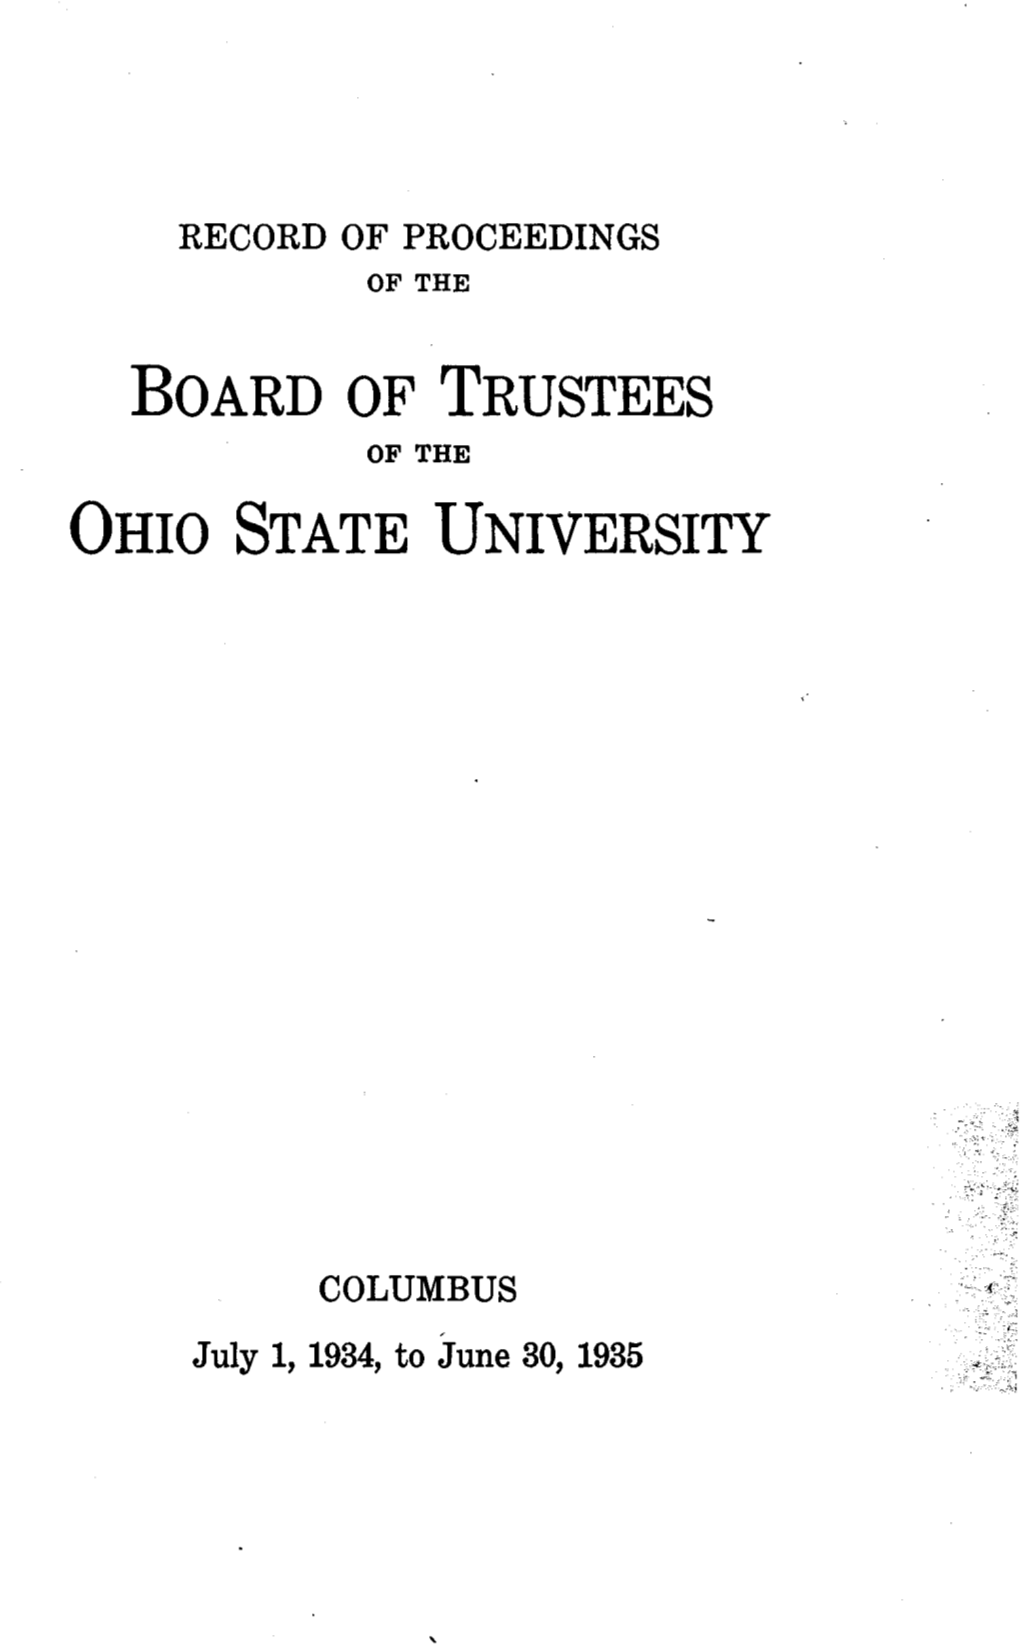 Board of Trustees Ohio State University I Should Very Much Appreciate Action by the Board of Trus- Tees of Ohio State University in Extending Mr